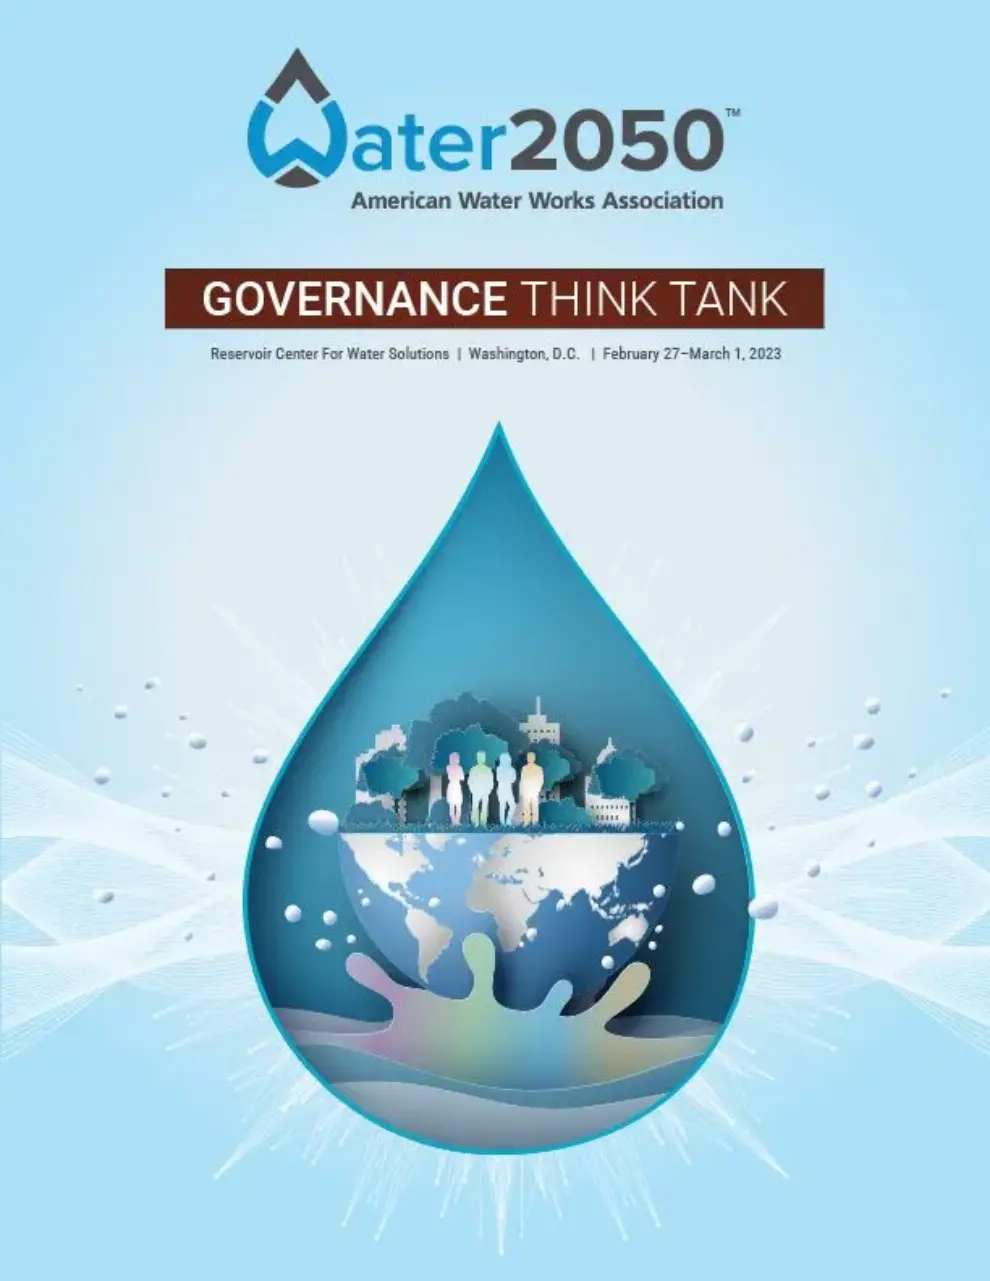 <strong>Thought leaders envision the future of water policy, regulation, access and management</strong>